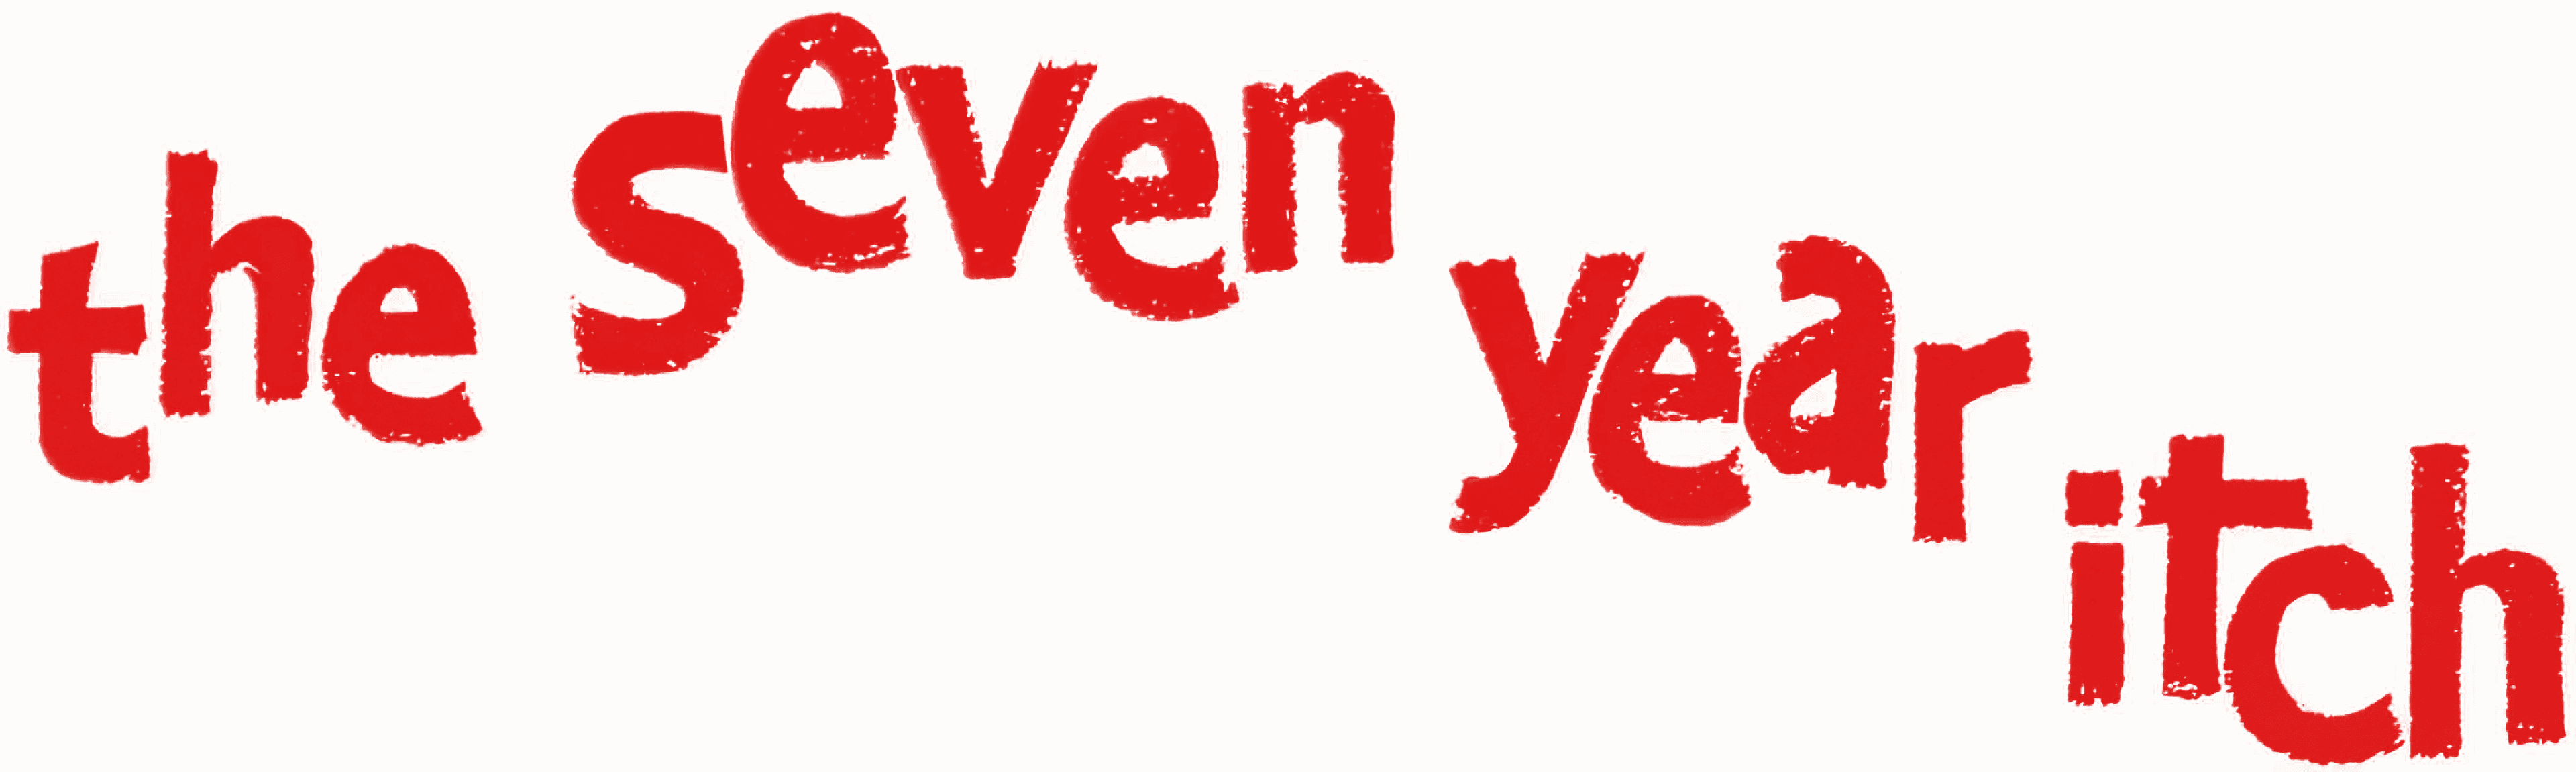 The Seven Year Itch logo